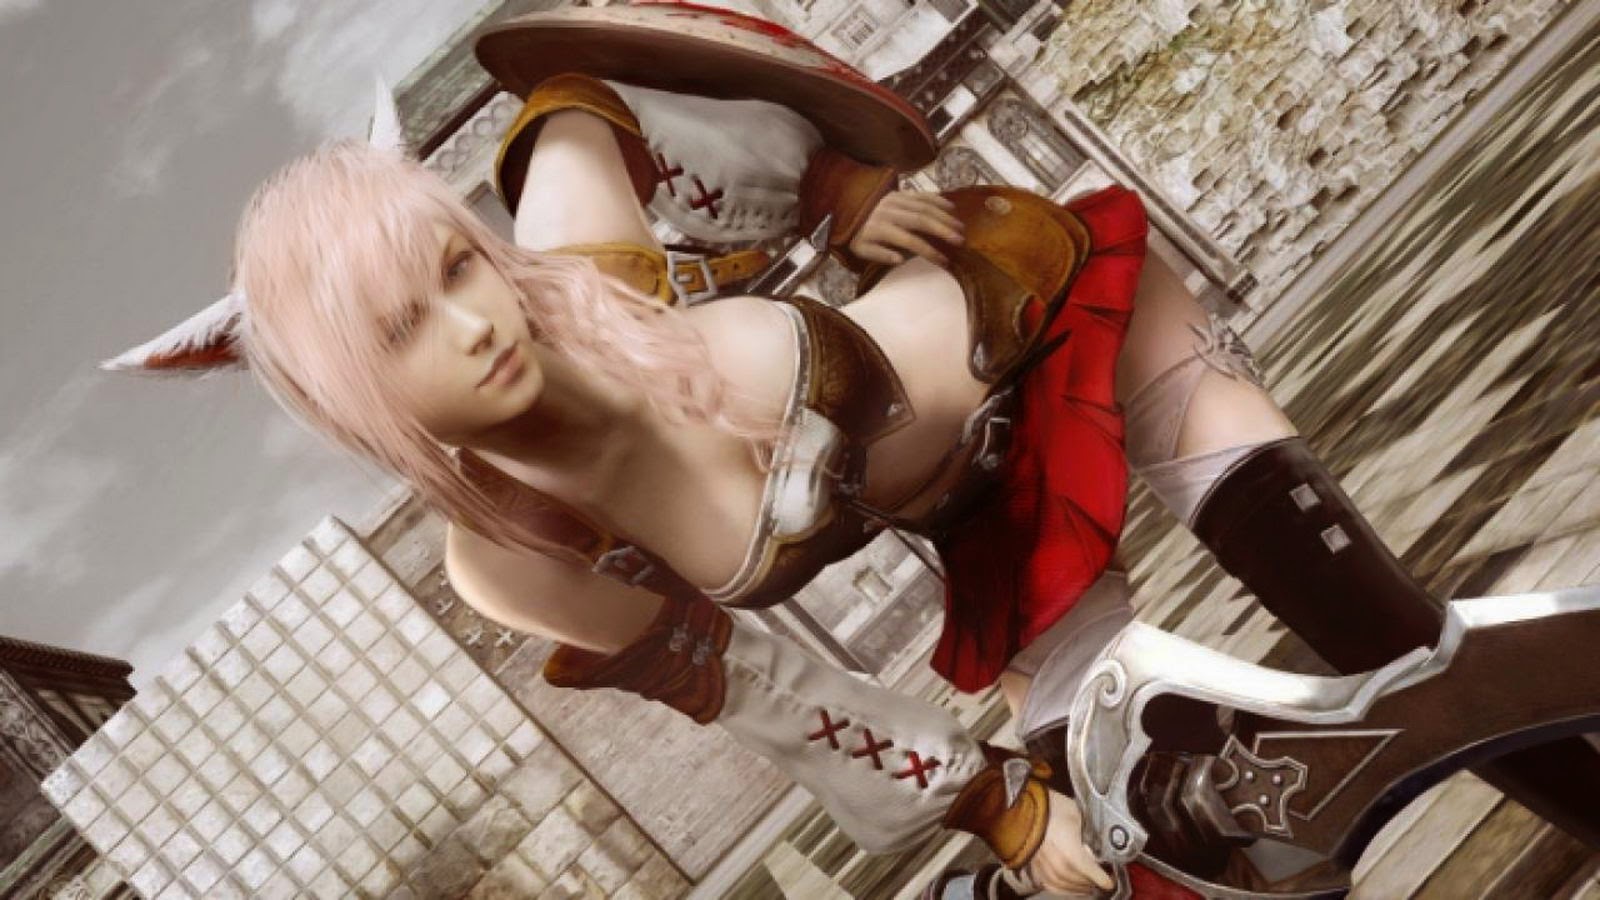 Louis Vuitton Interview With Final Fantasy's Lightning Should Be Canon